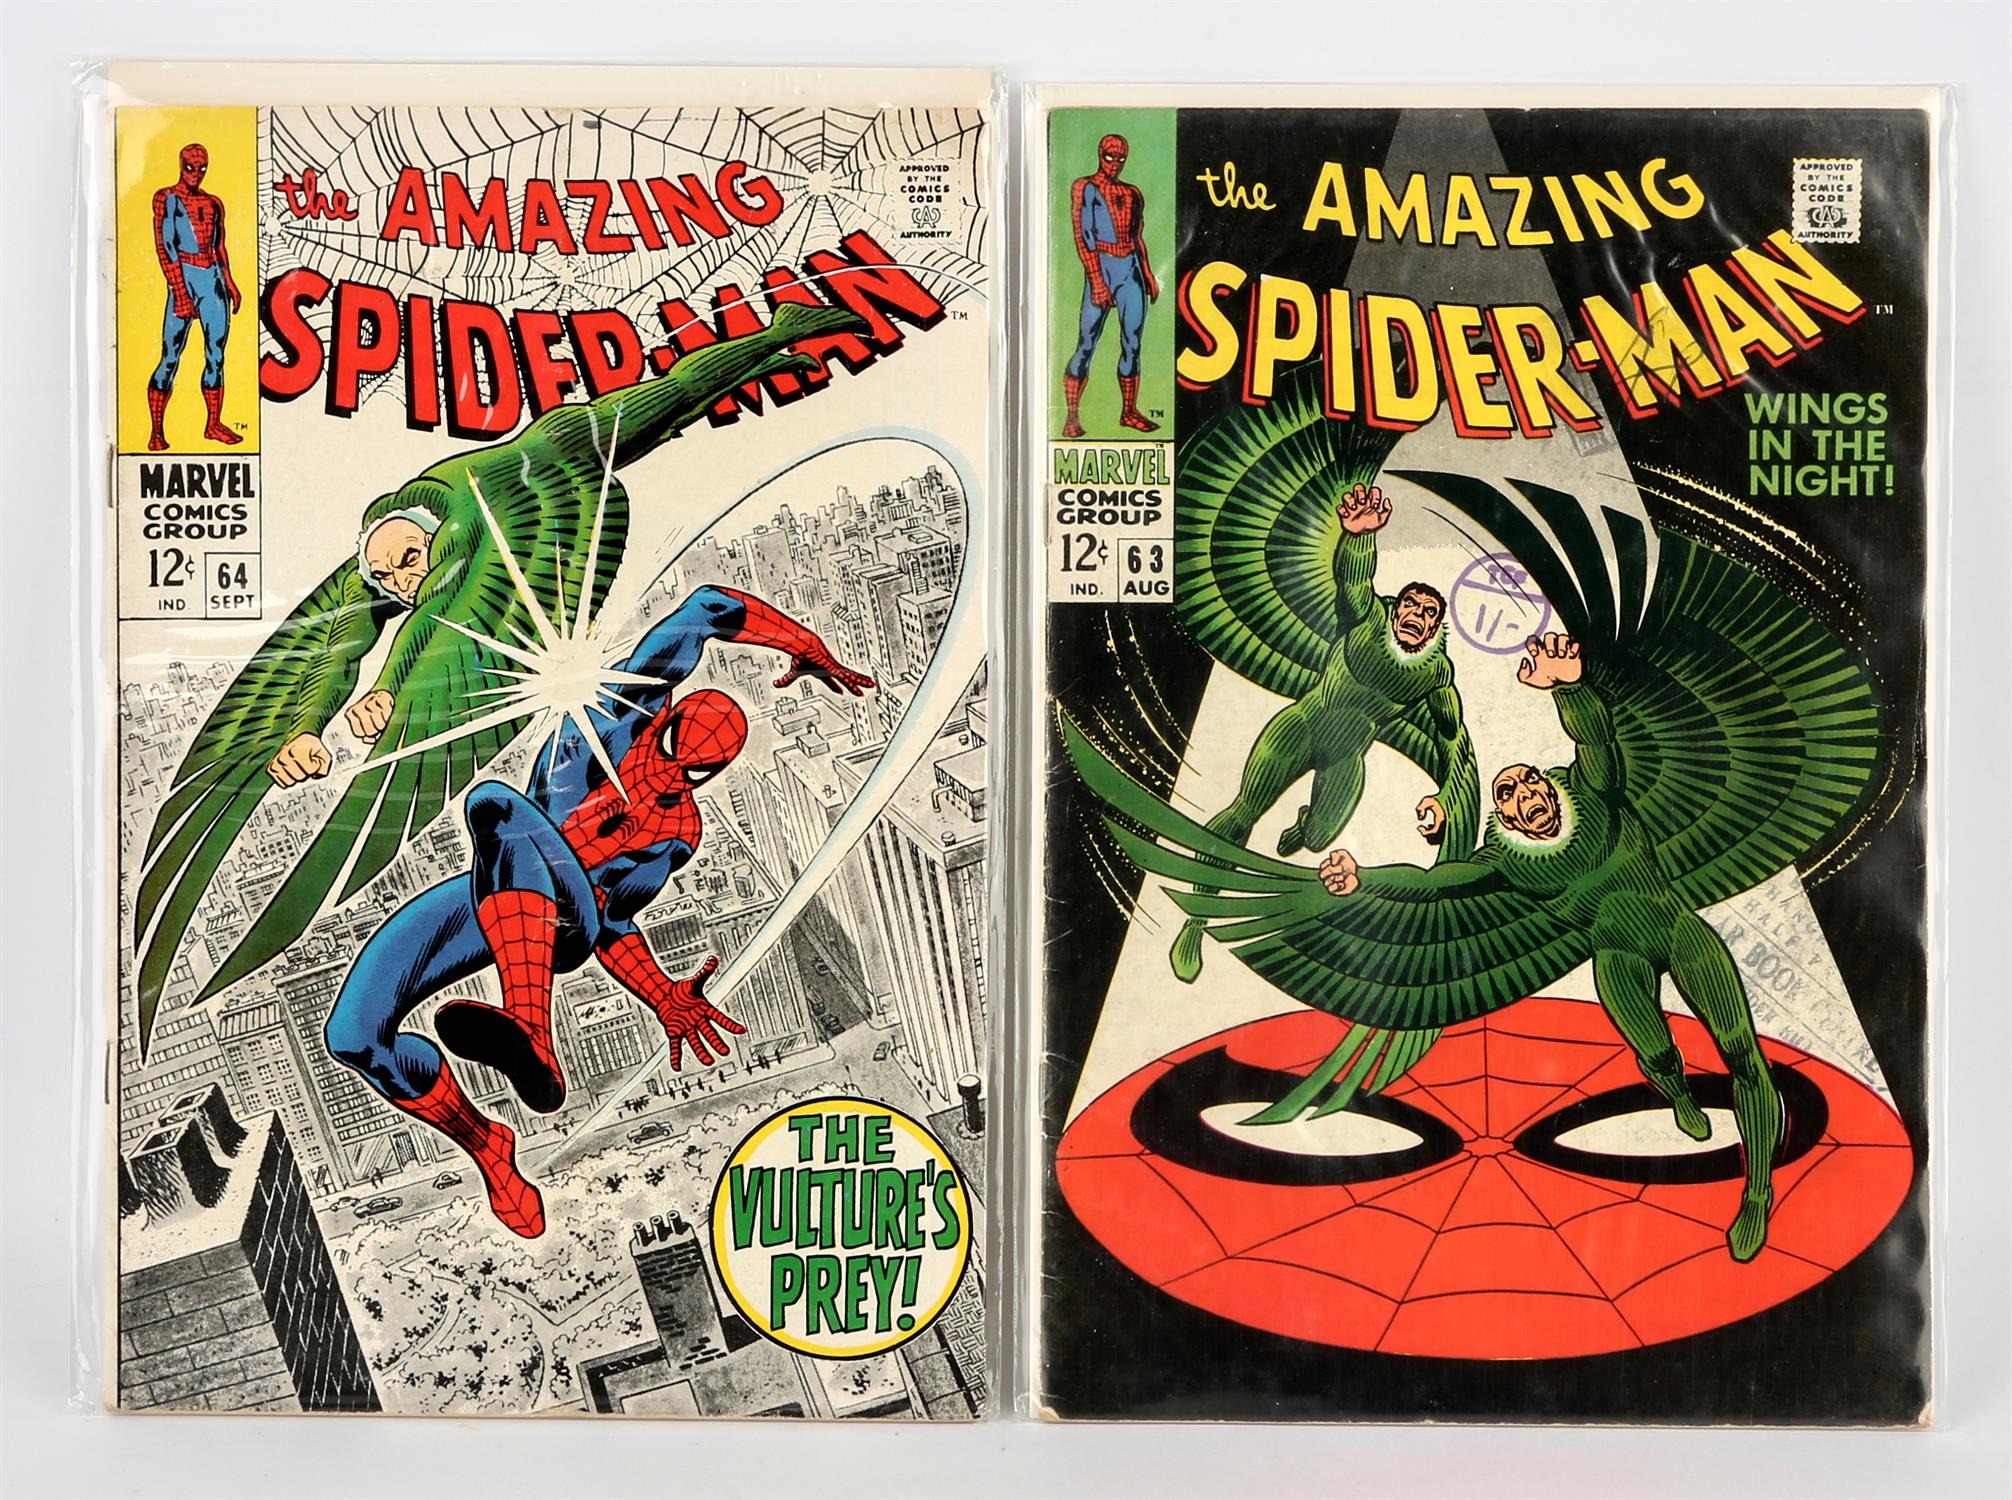 Marvel Comics: The Amazing Spider-Man No. 63, 64 a pair of issues featuring classic Vulture covers